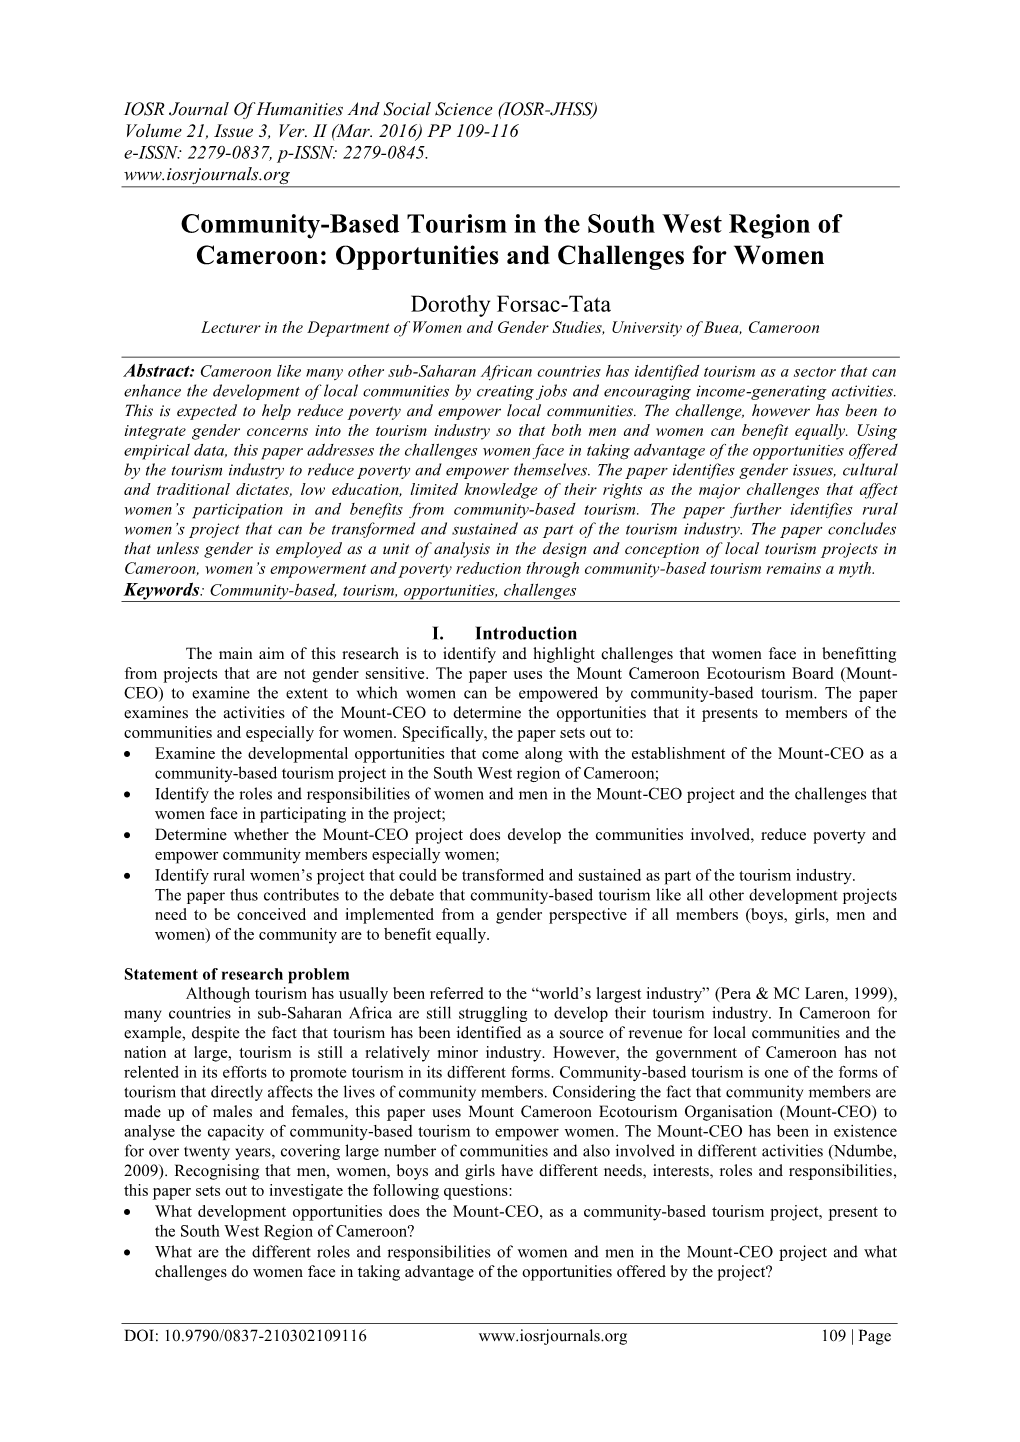 Community-Based Tourism in the South West Region of Cameroon: Opportunities and Challenges for Women